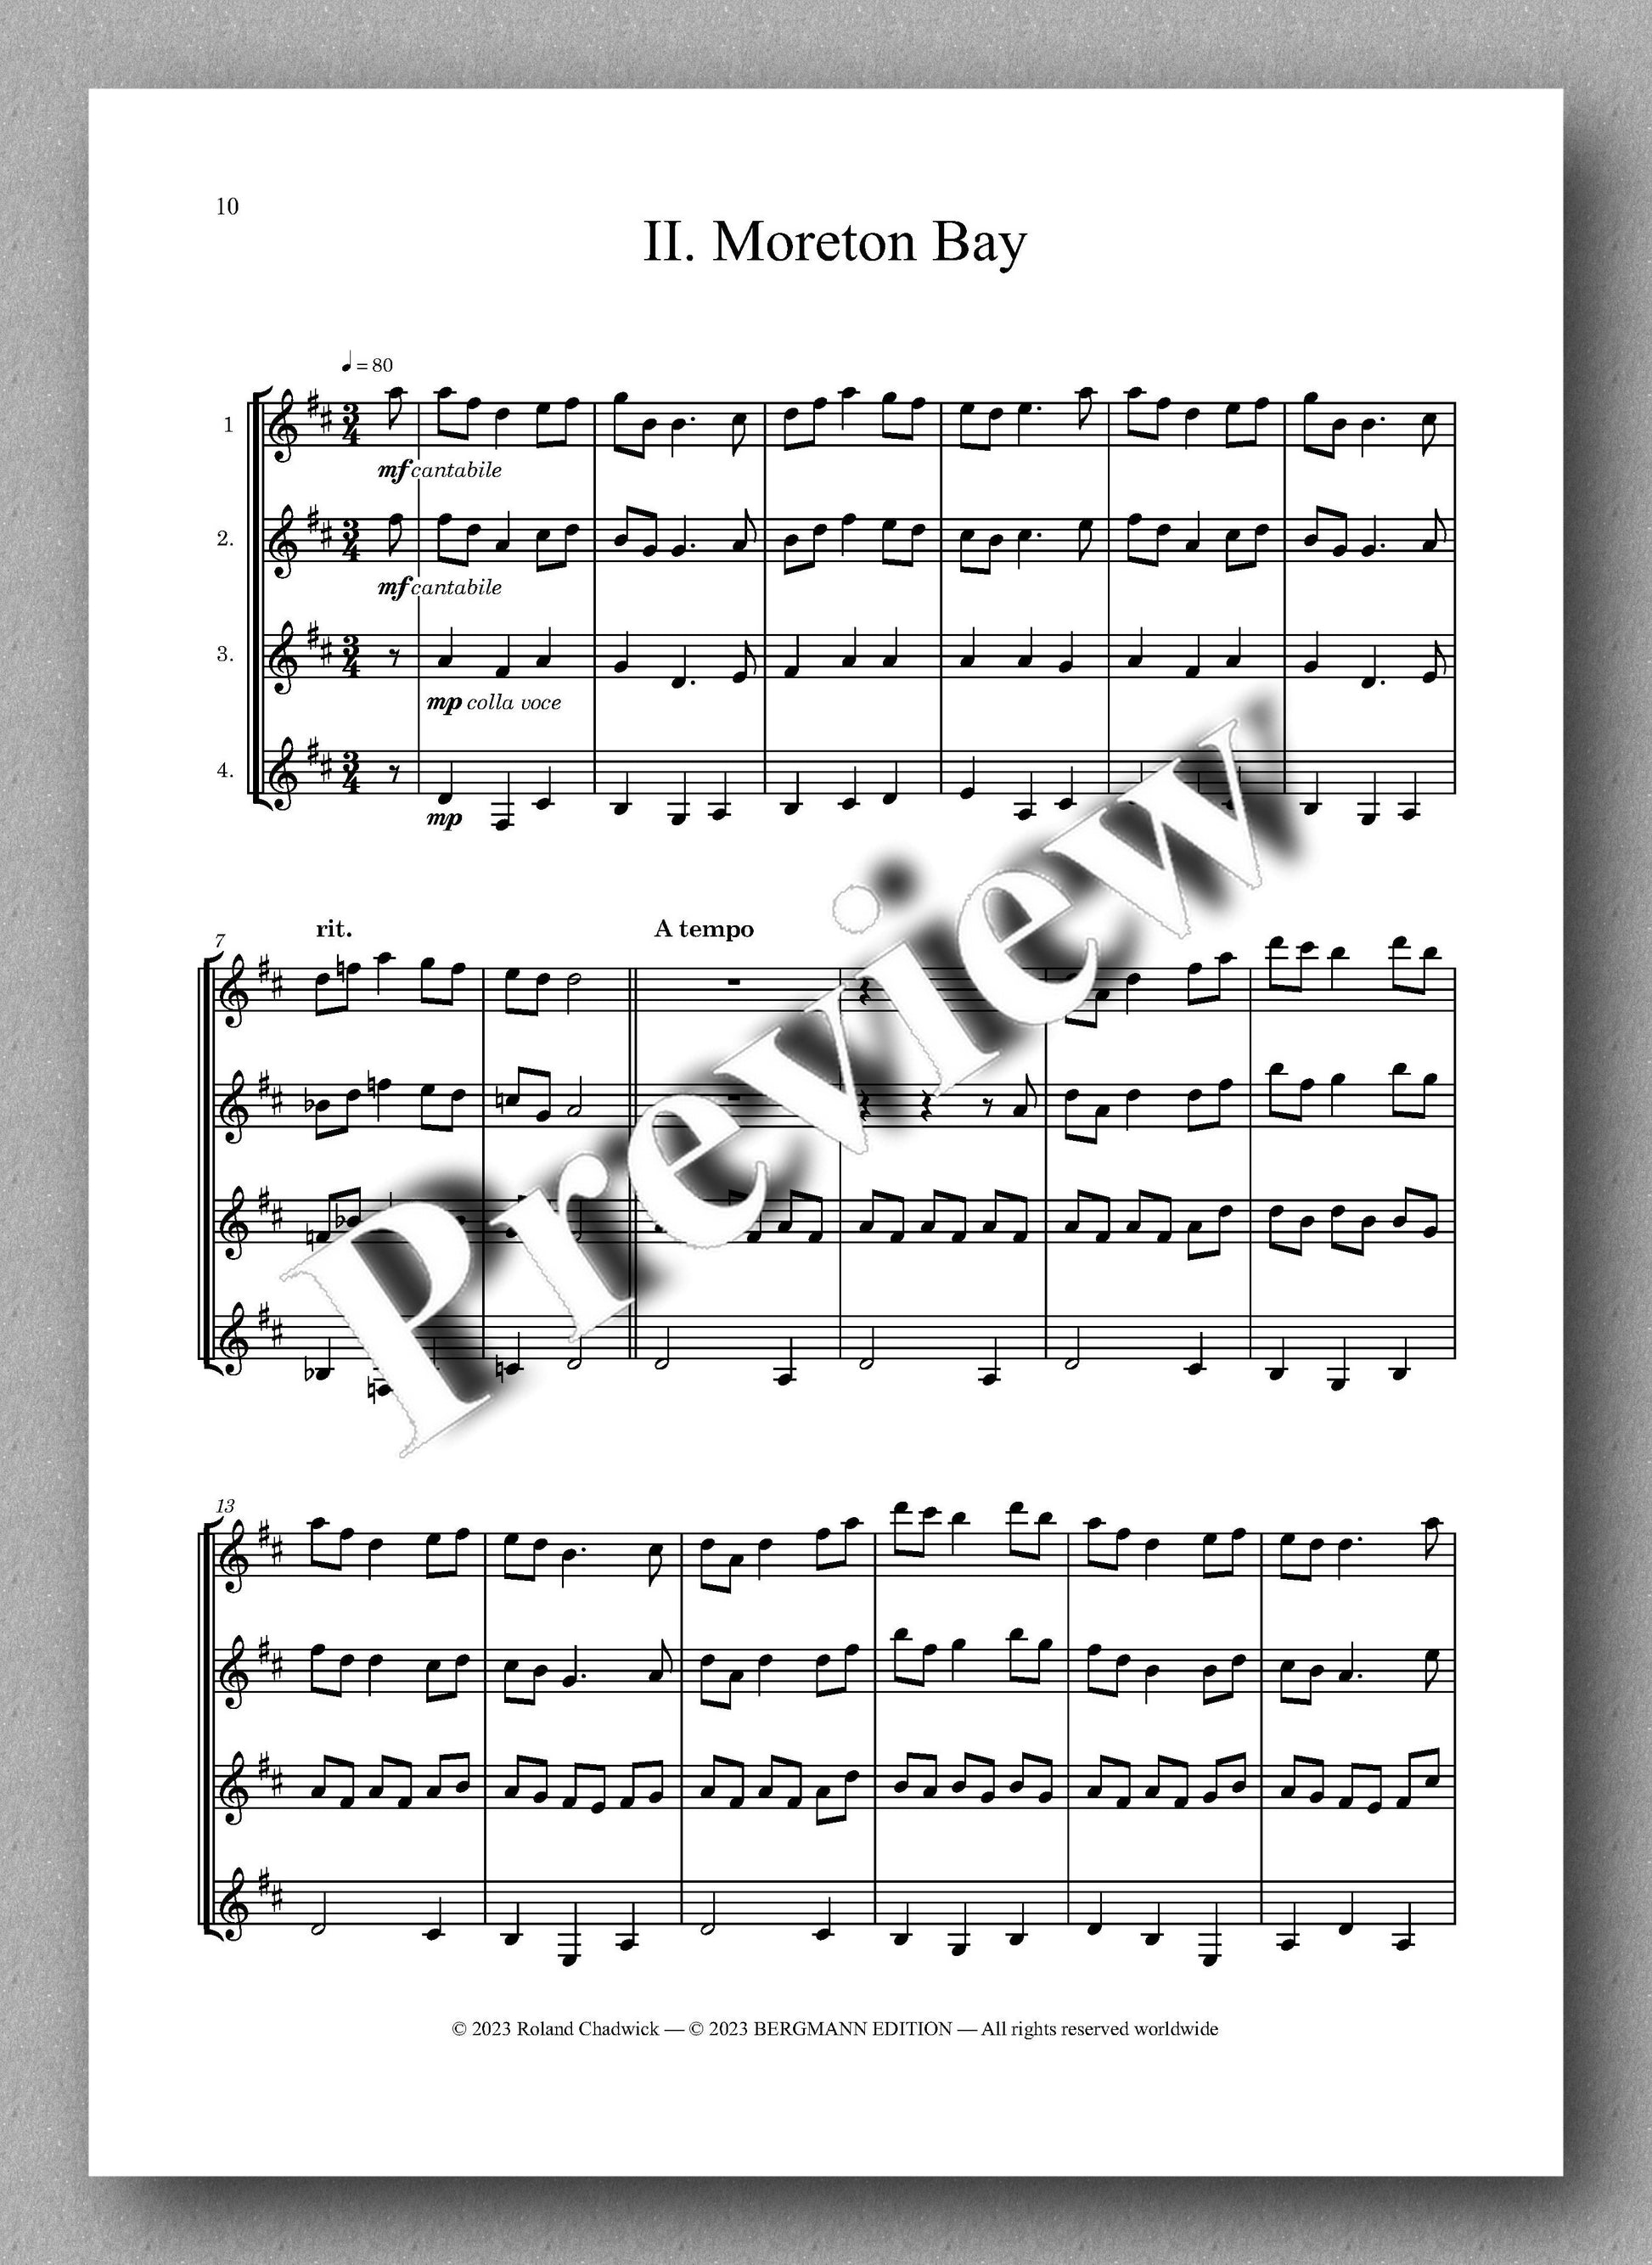 Roland Chadwick, Colonial Suite - preview of the music score 2